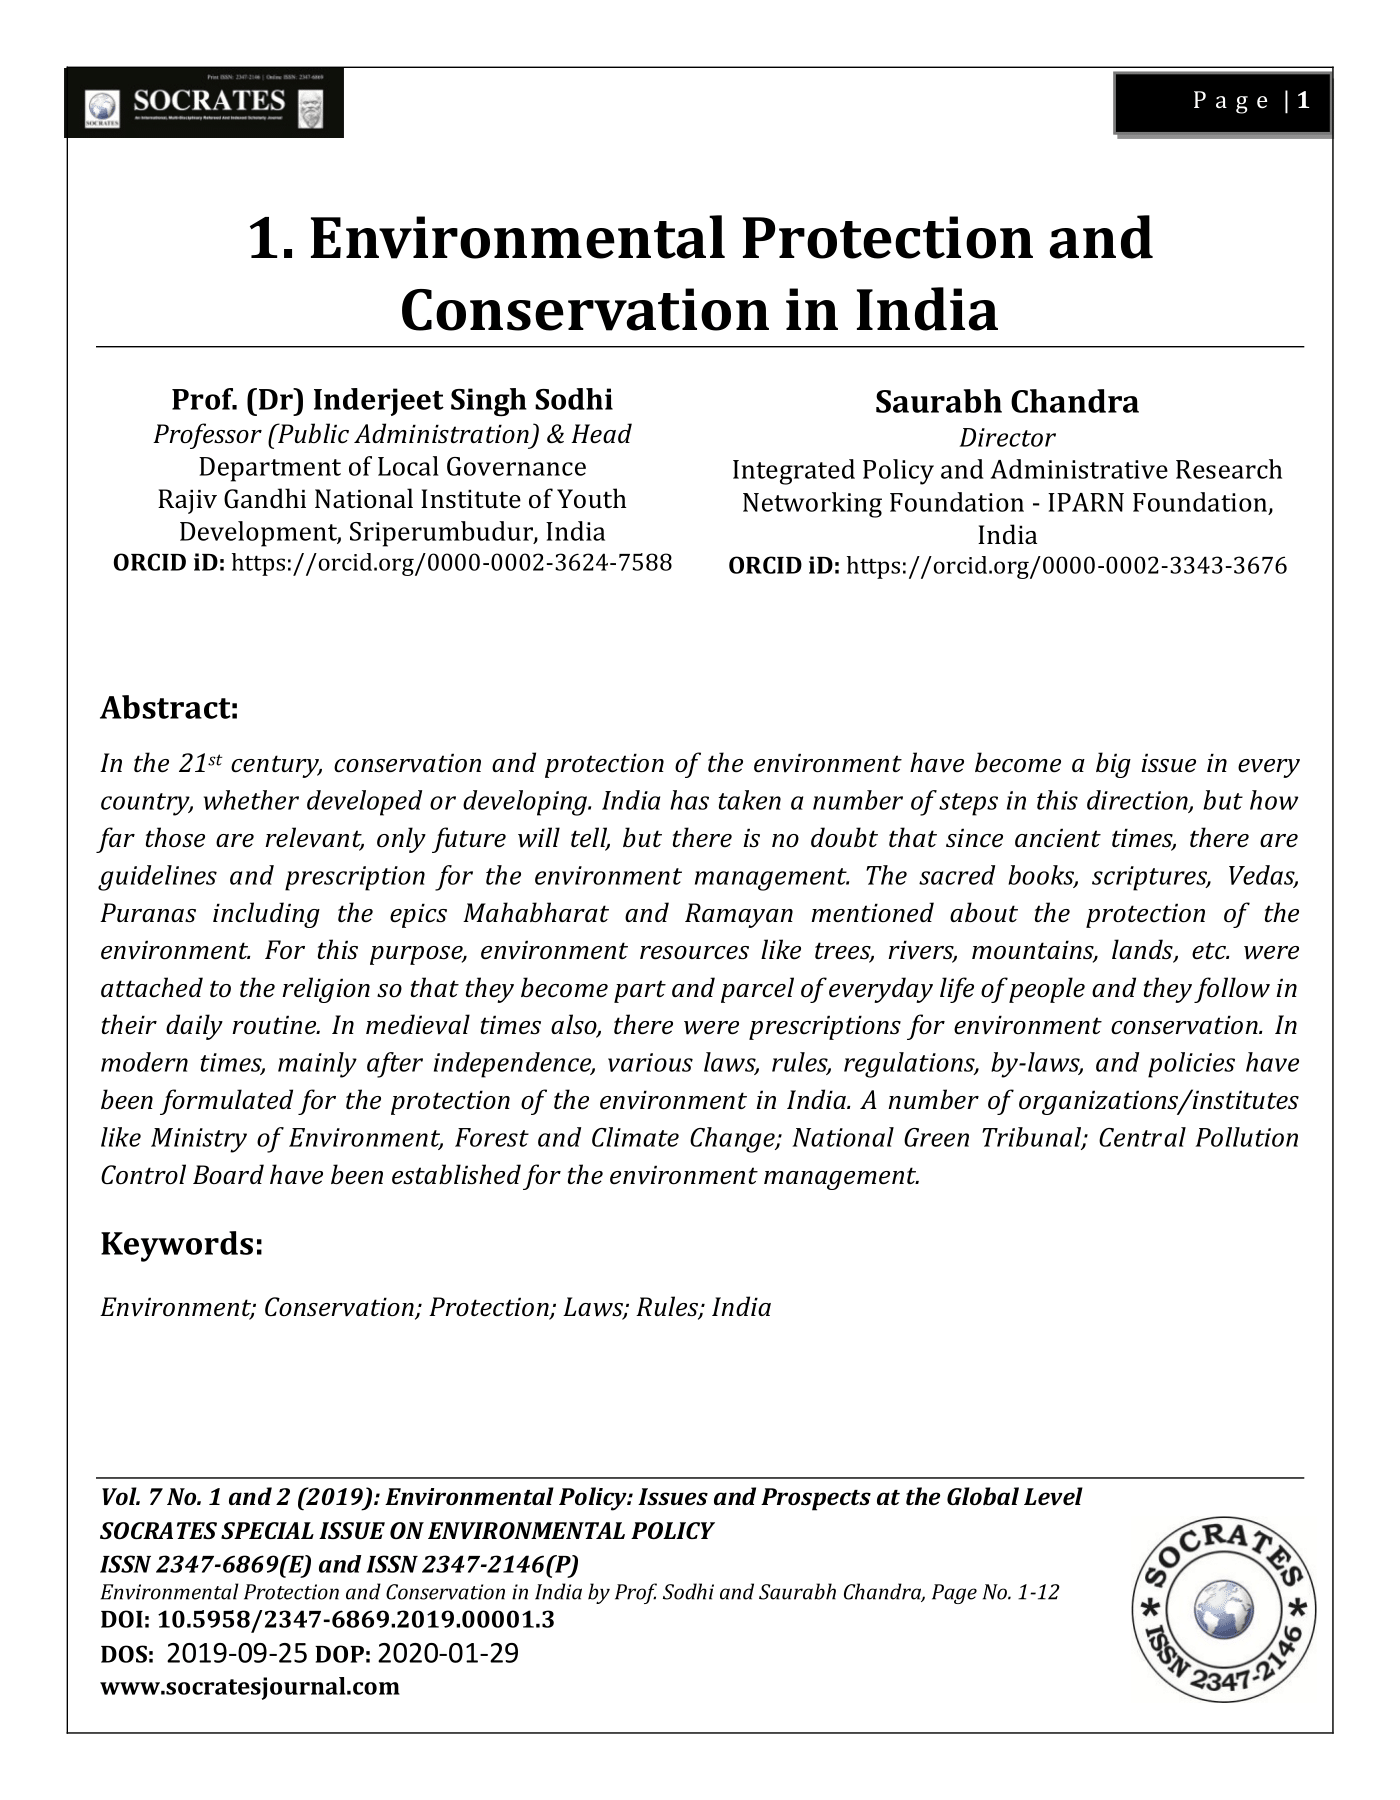 Environmental Protection and Conservation in India